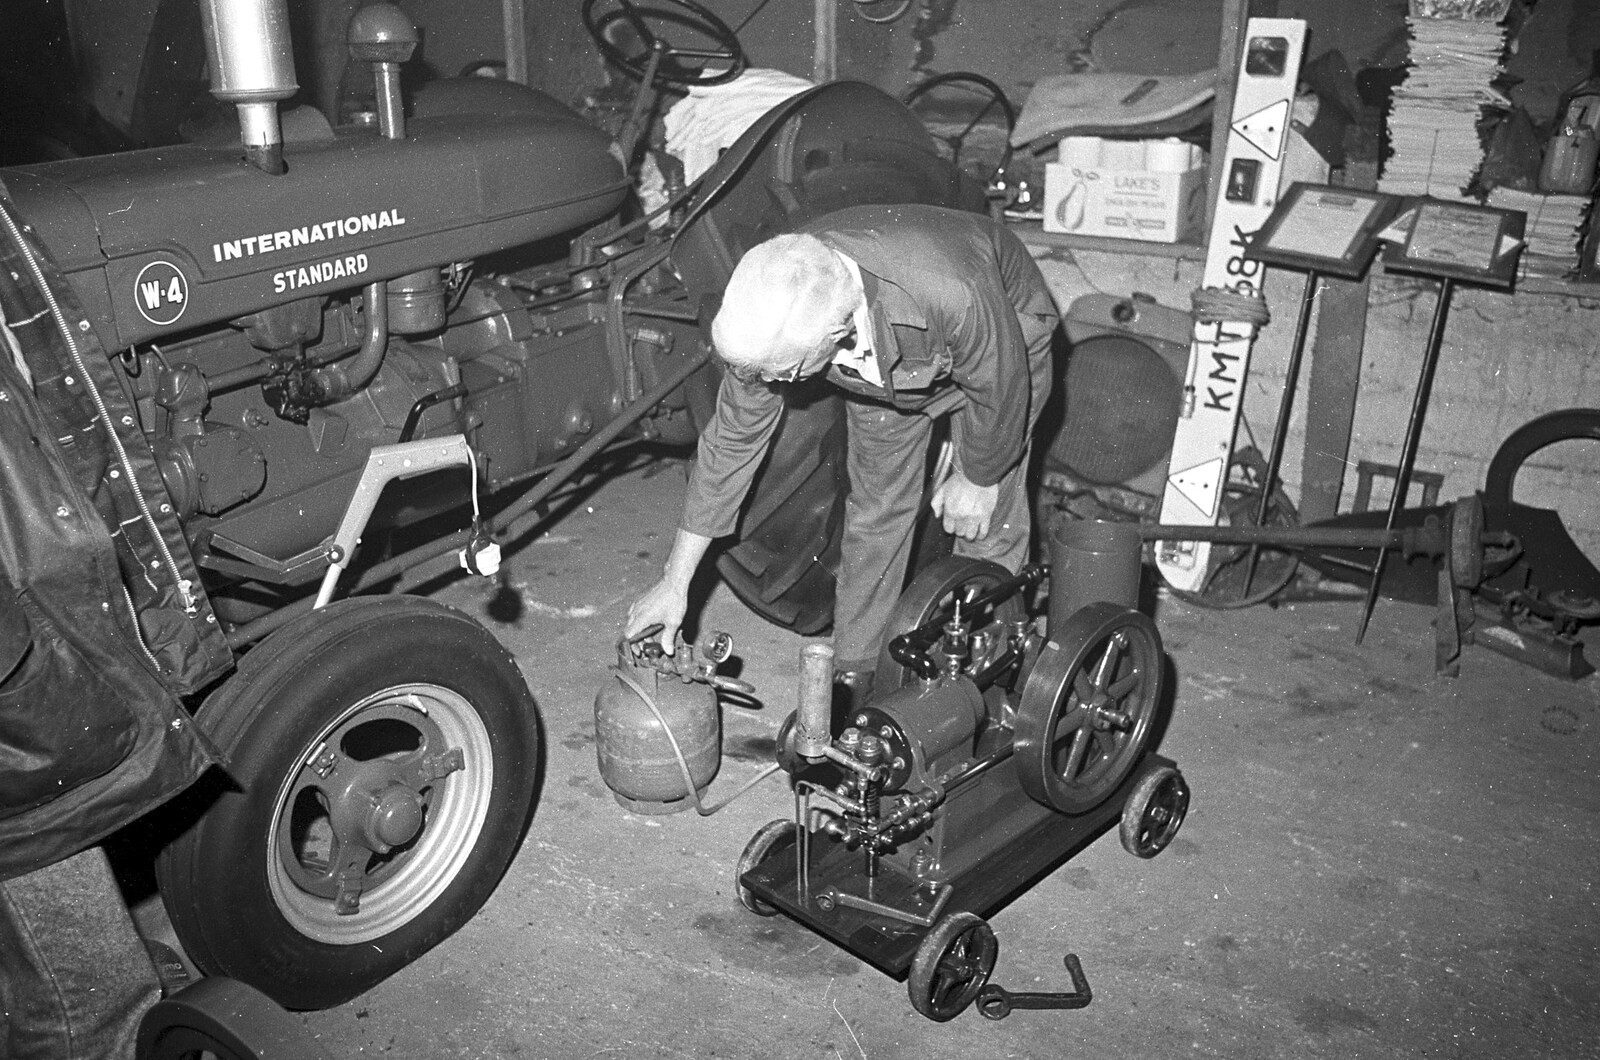 A Black and White Life in Concrete, Stuston, Suffolk - 3rd September 1992: A small stationery engine is prepped with a gas bottle